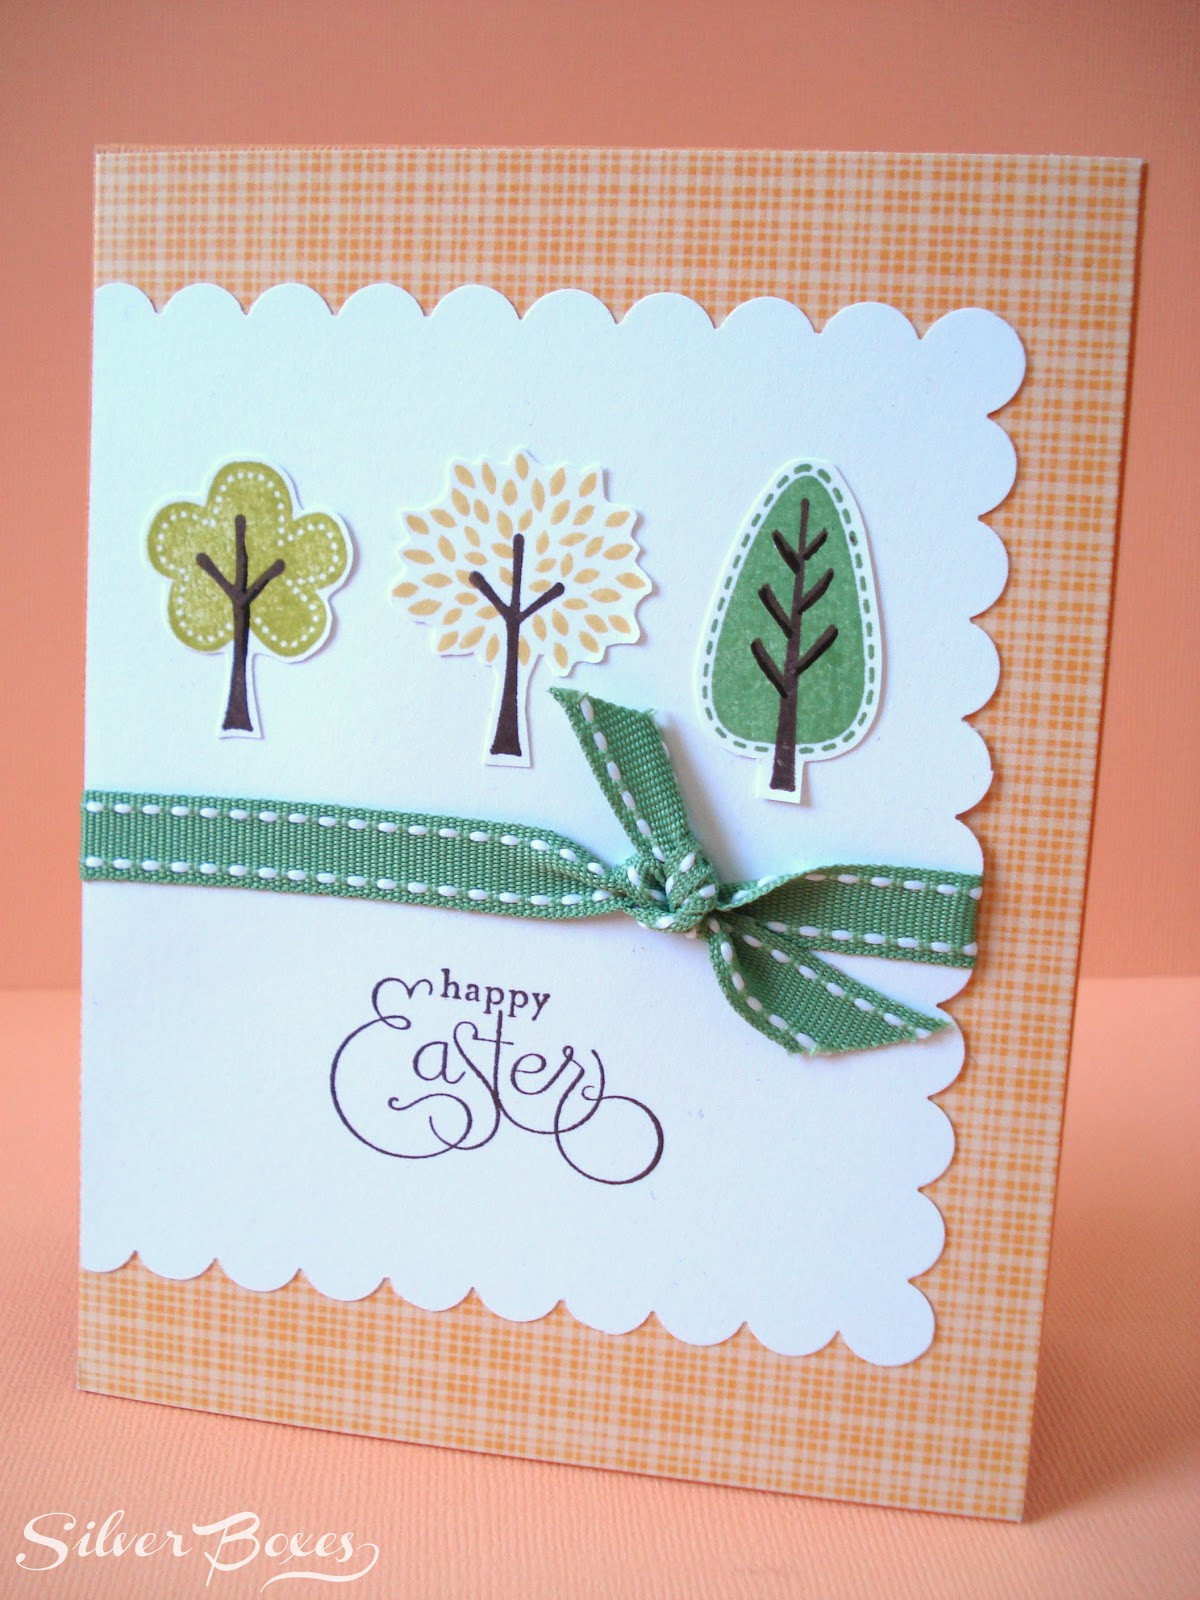 Stampin Up Easter Cards Ideas
 Silver Boxes Happy Easter Card Stampin Up 